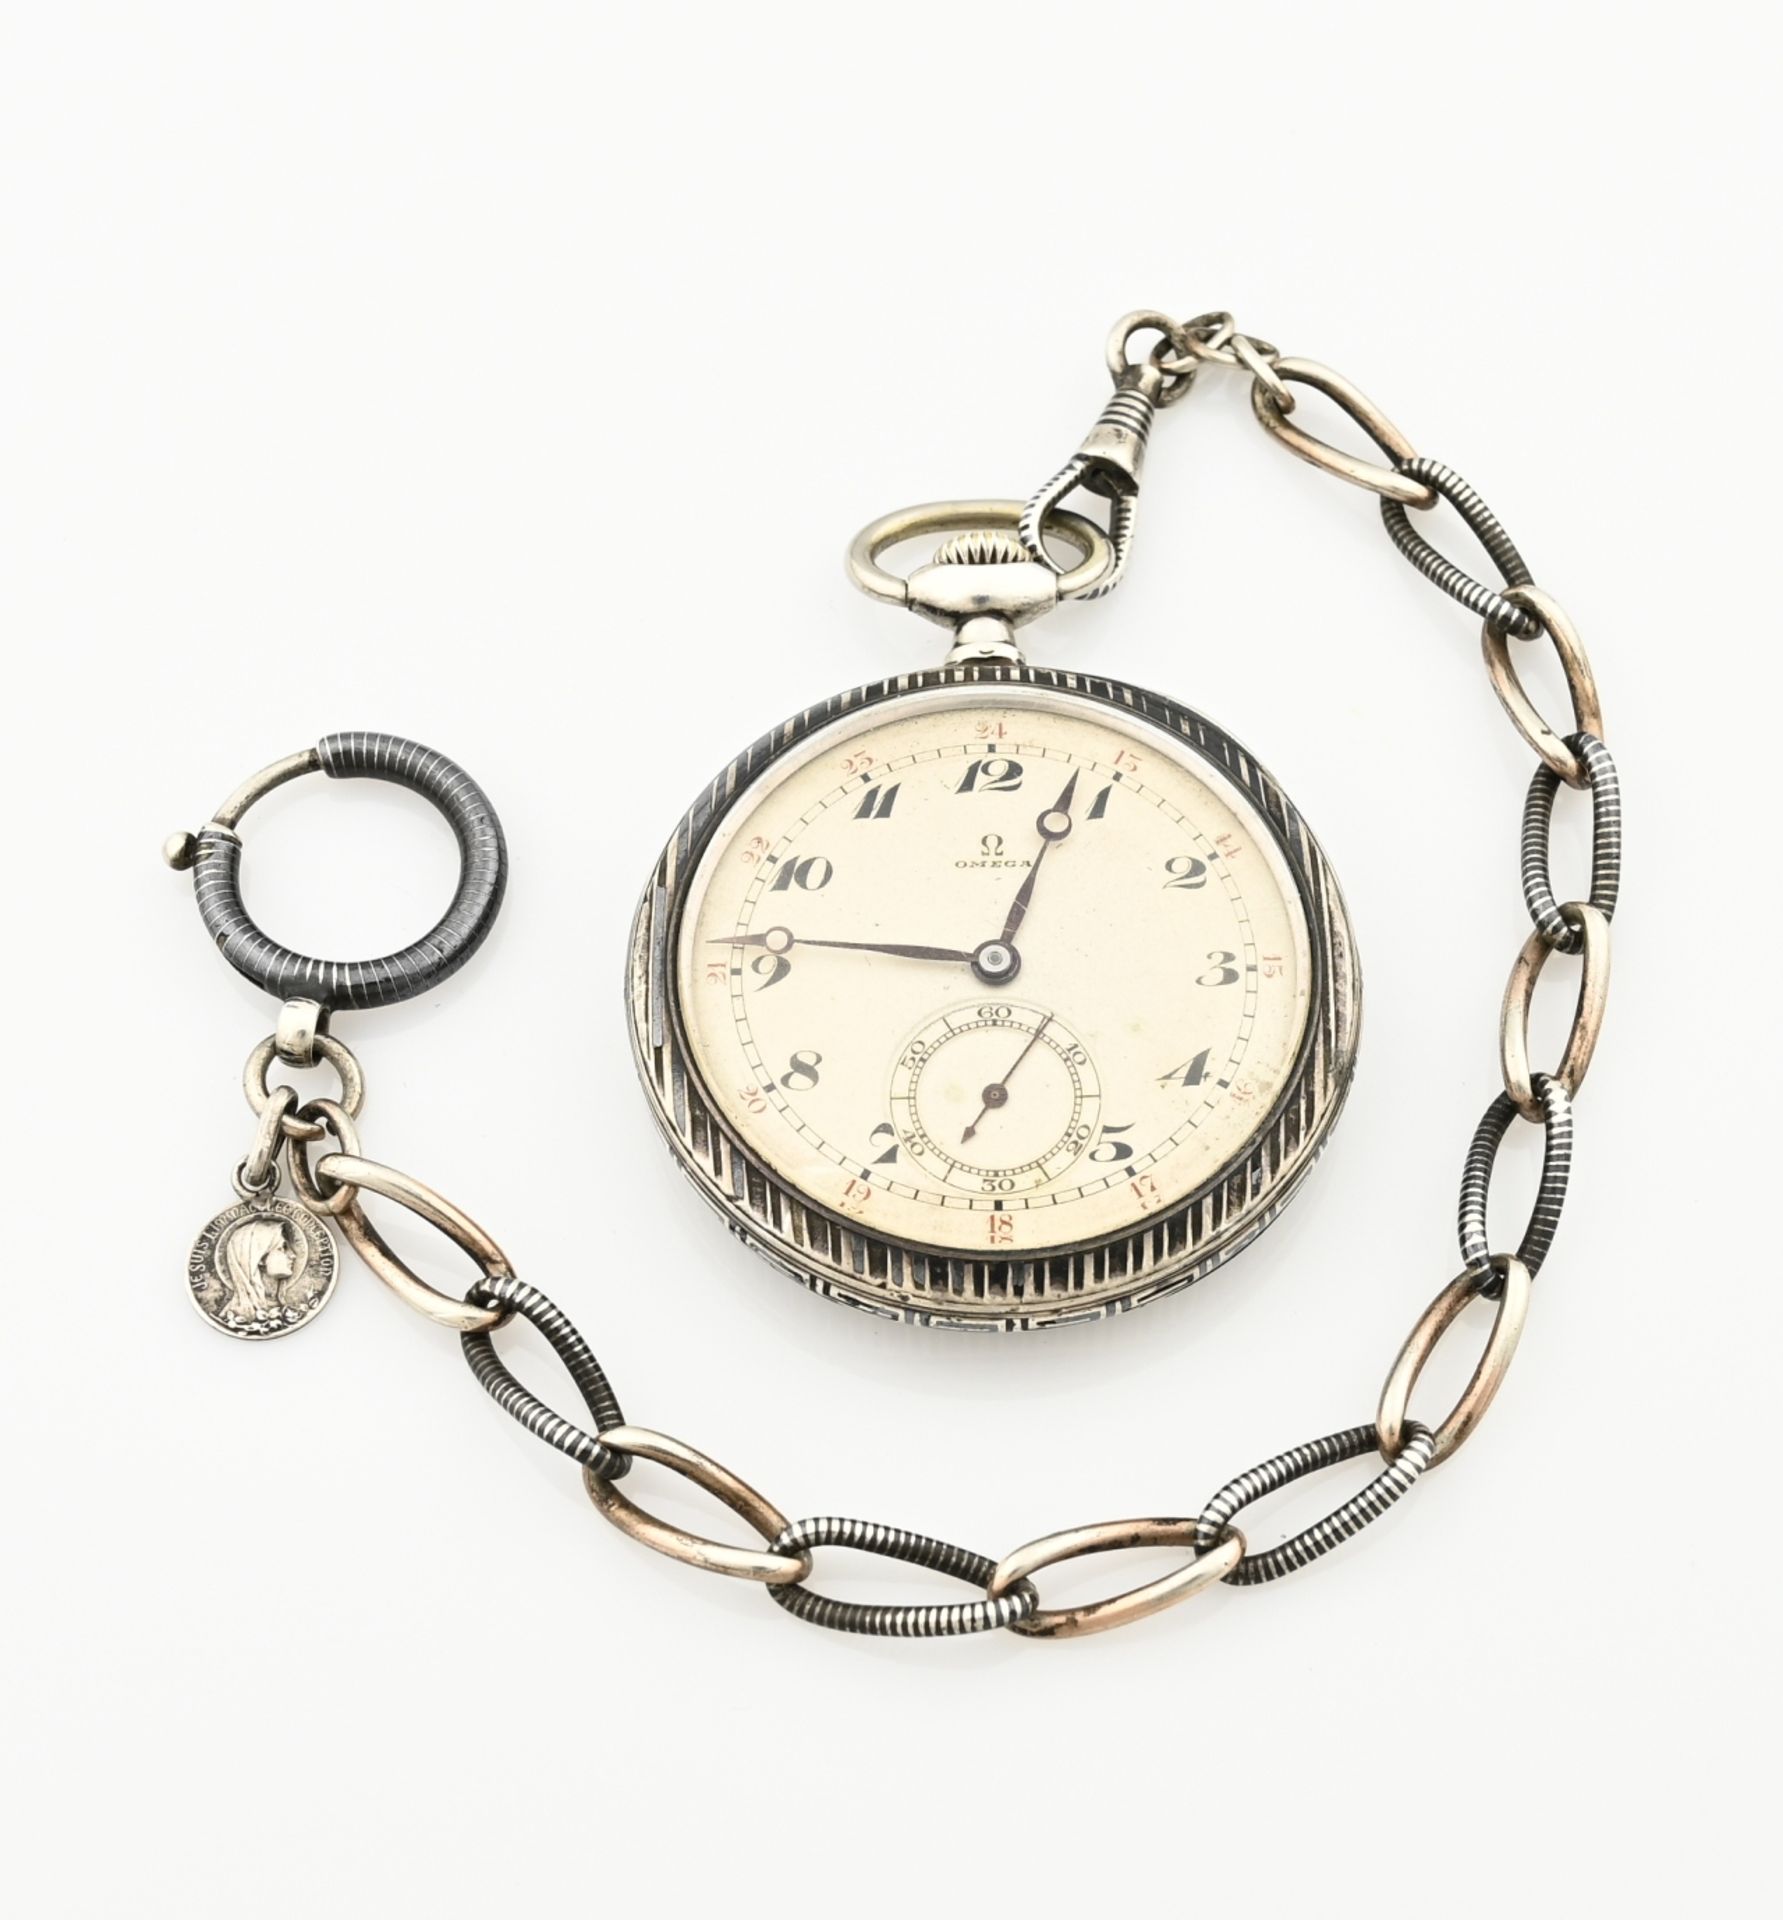 Silver Omega pocket watch with chain